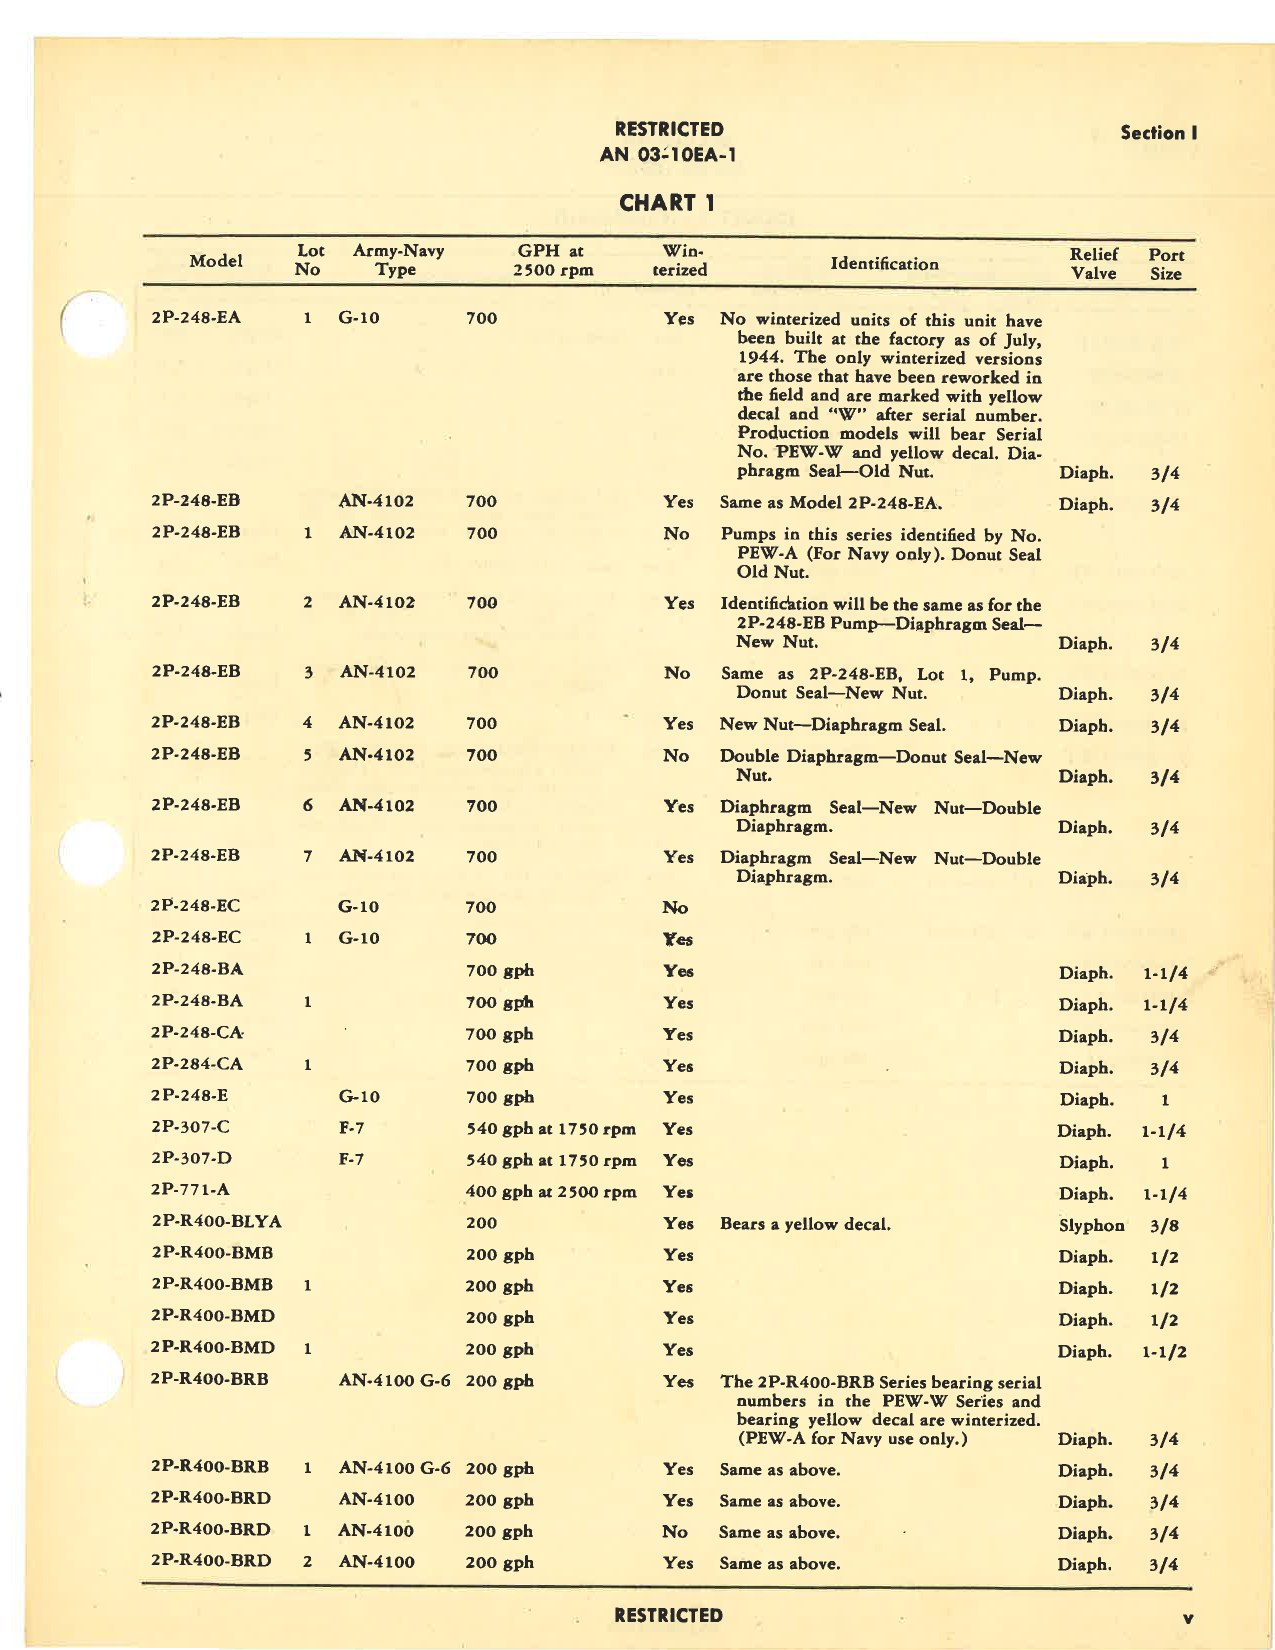 Sample page 7 from AirCorps Library document: Operation, Service, & Overhaul Instructions with Parts Catalog for Engine-Driven Fuel Pumps